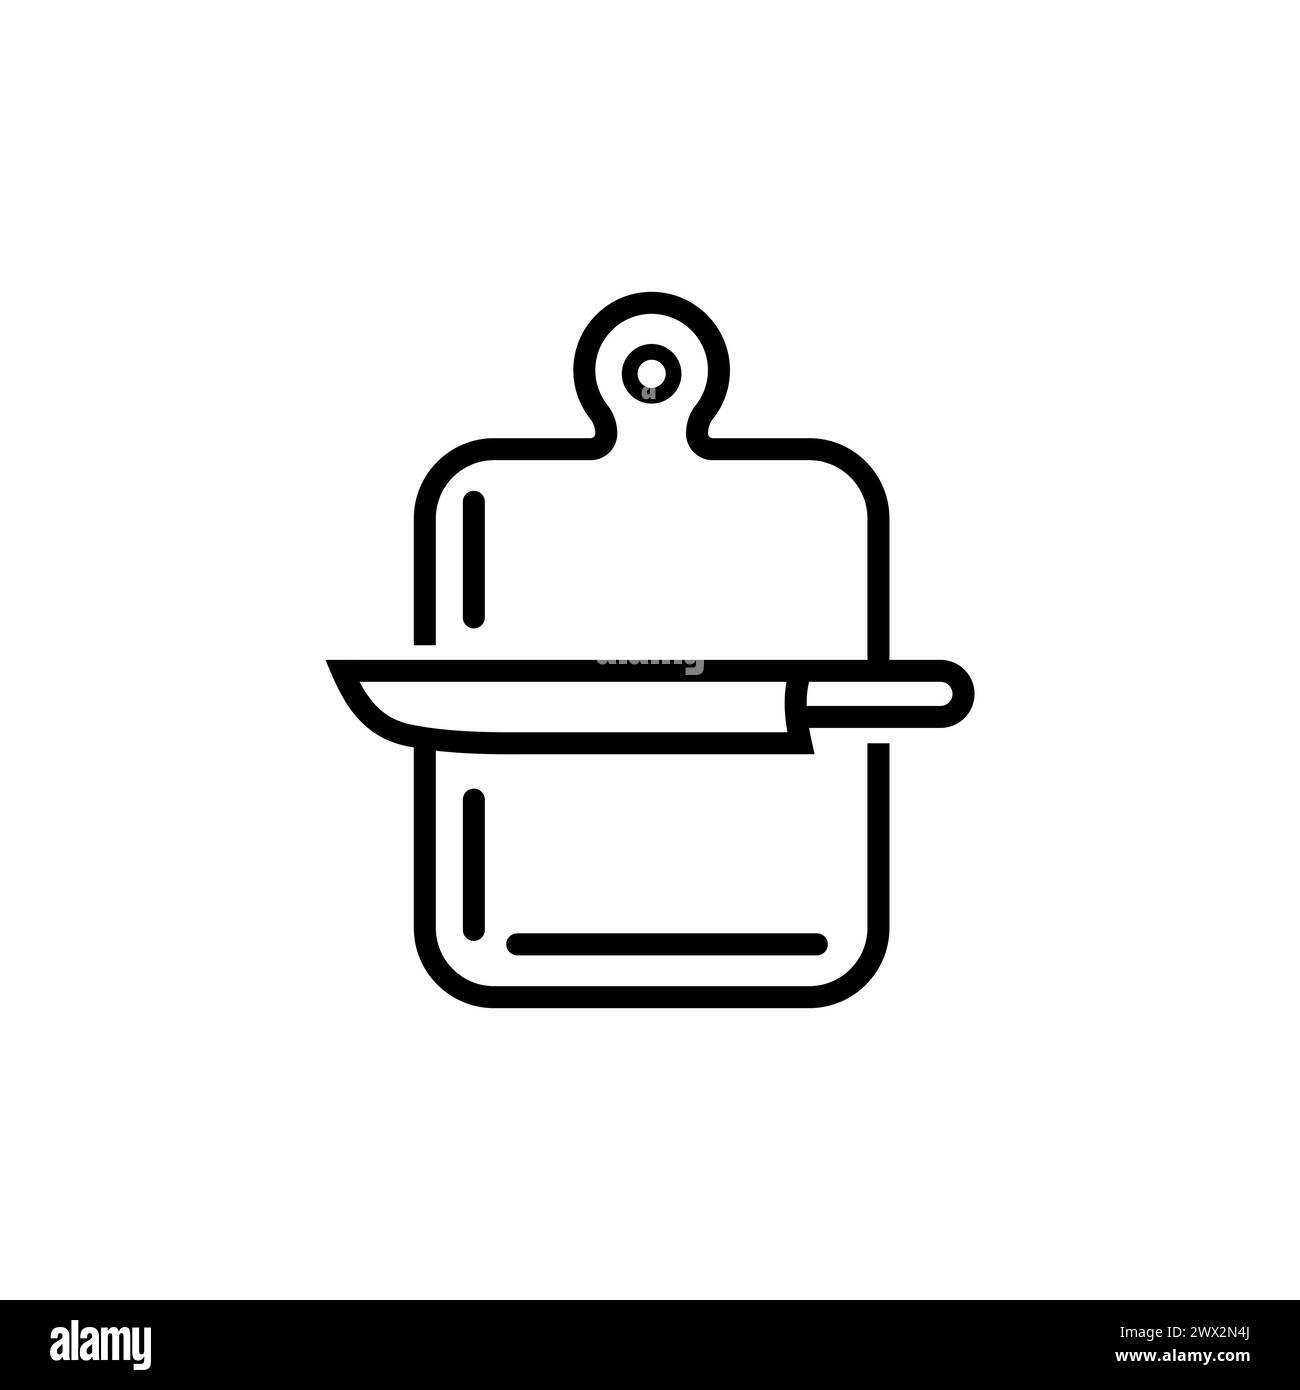 Cooking, food, kitchen signs. Vector symbol in modern line style. Editable stroke. Line icon of knife and cutting board Stock Vector